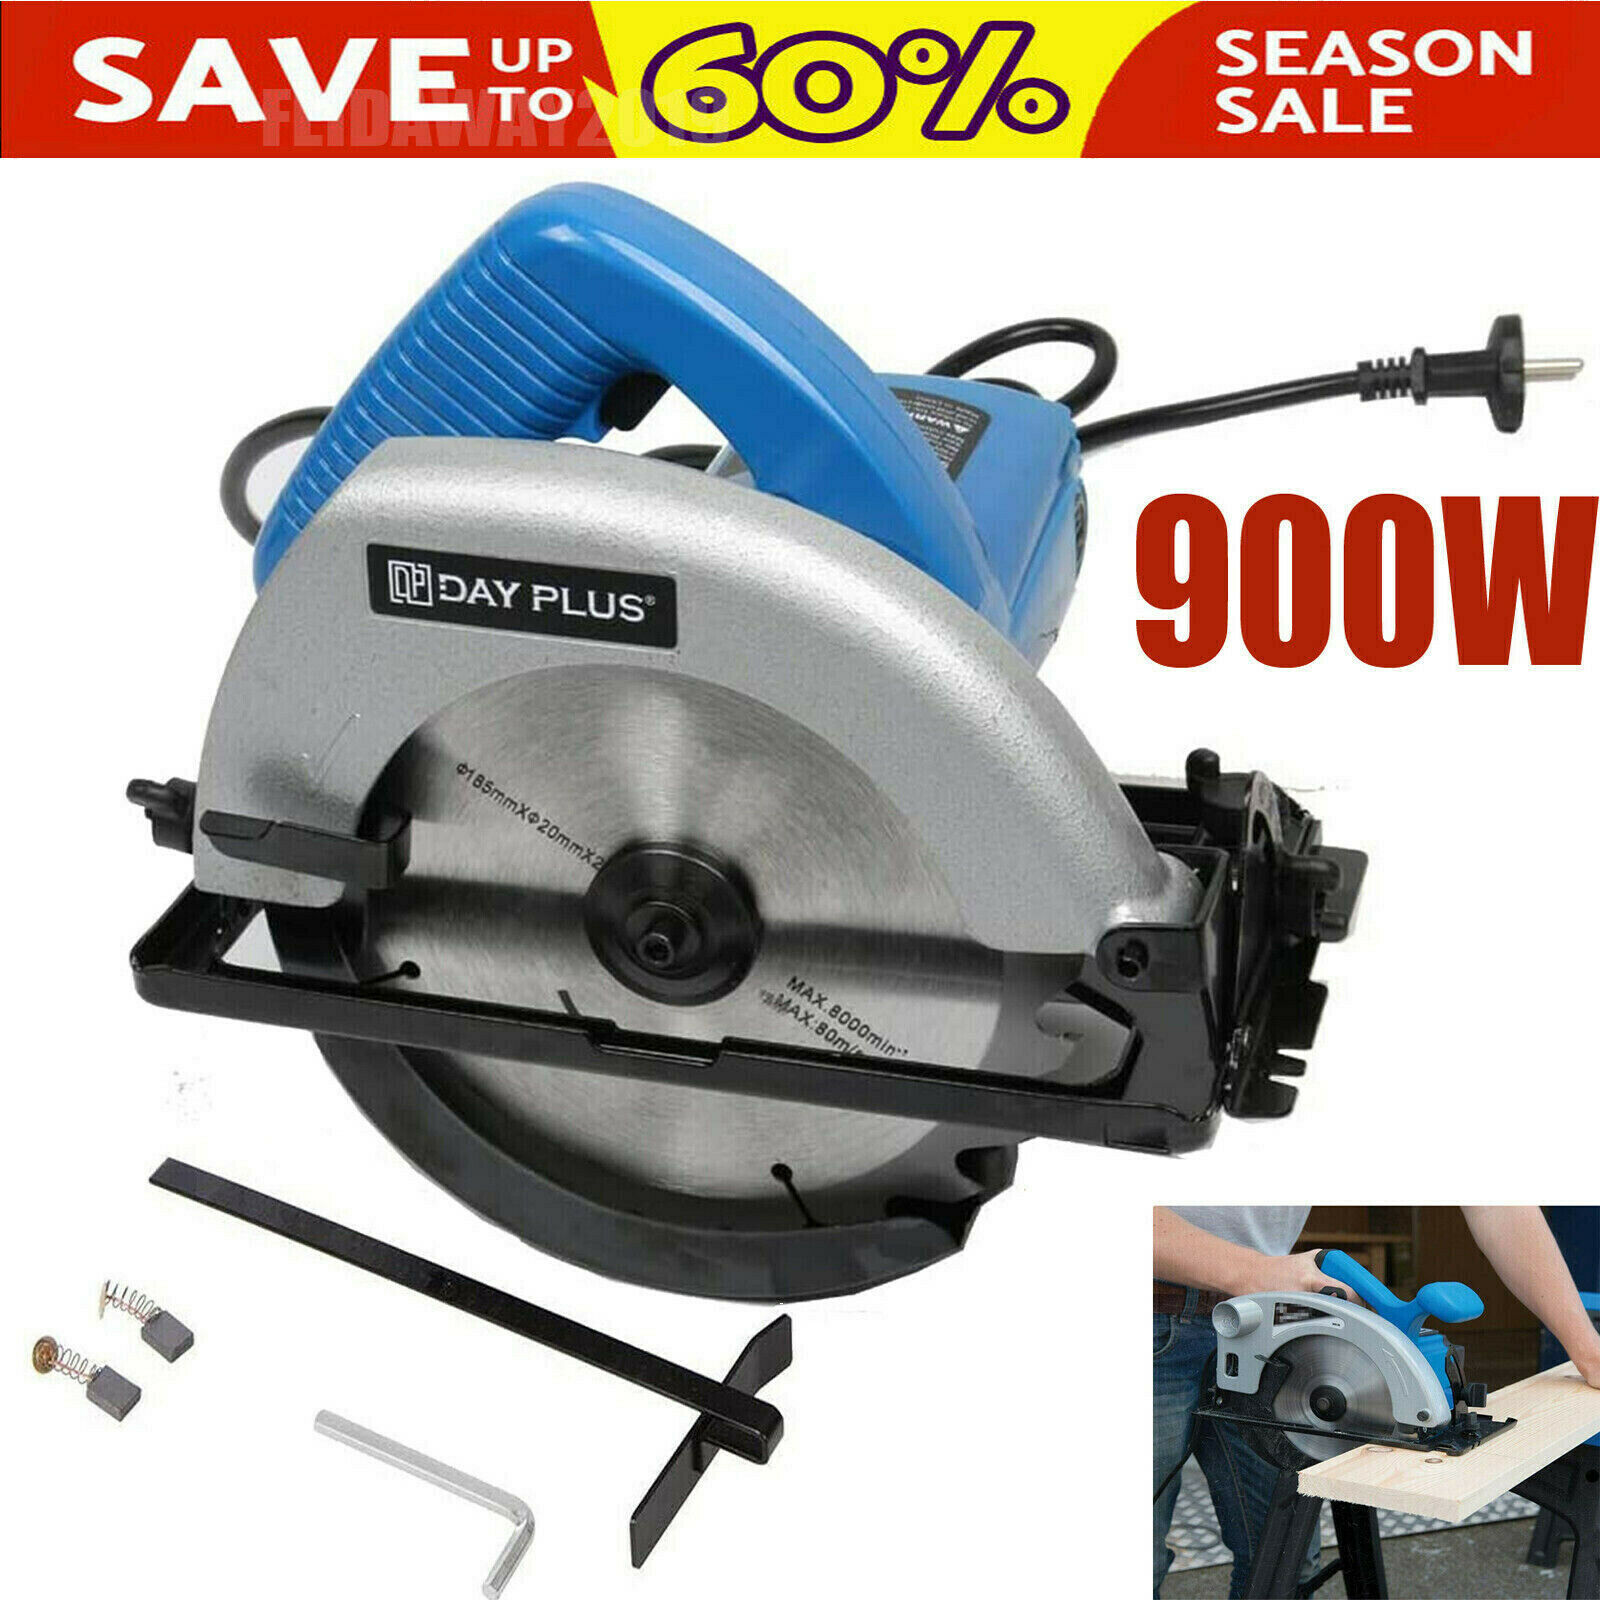 Bowoshen 900W Electric Circular Saw Tool  Double Safety Switch 180mm Blade  for DIY Workshop Wood Soft Metal Plastic Cutting